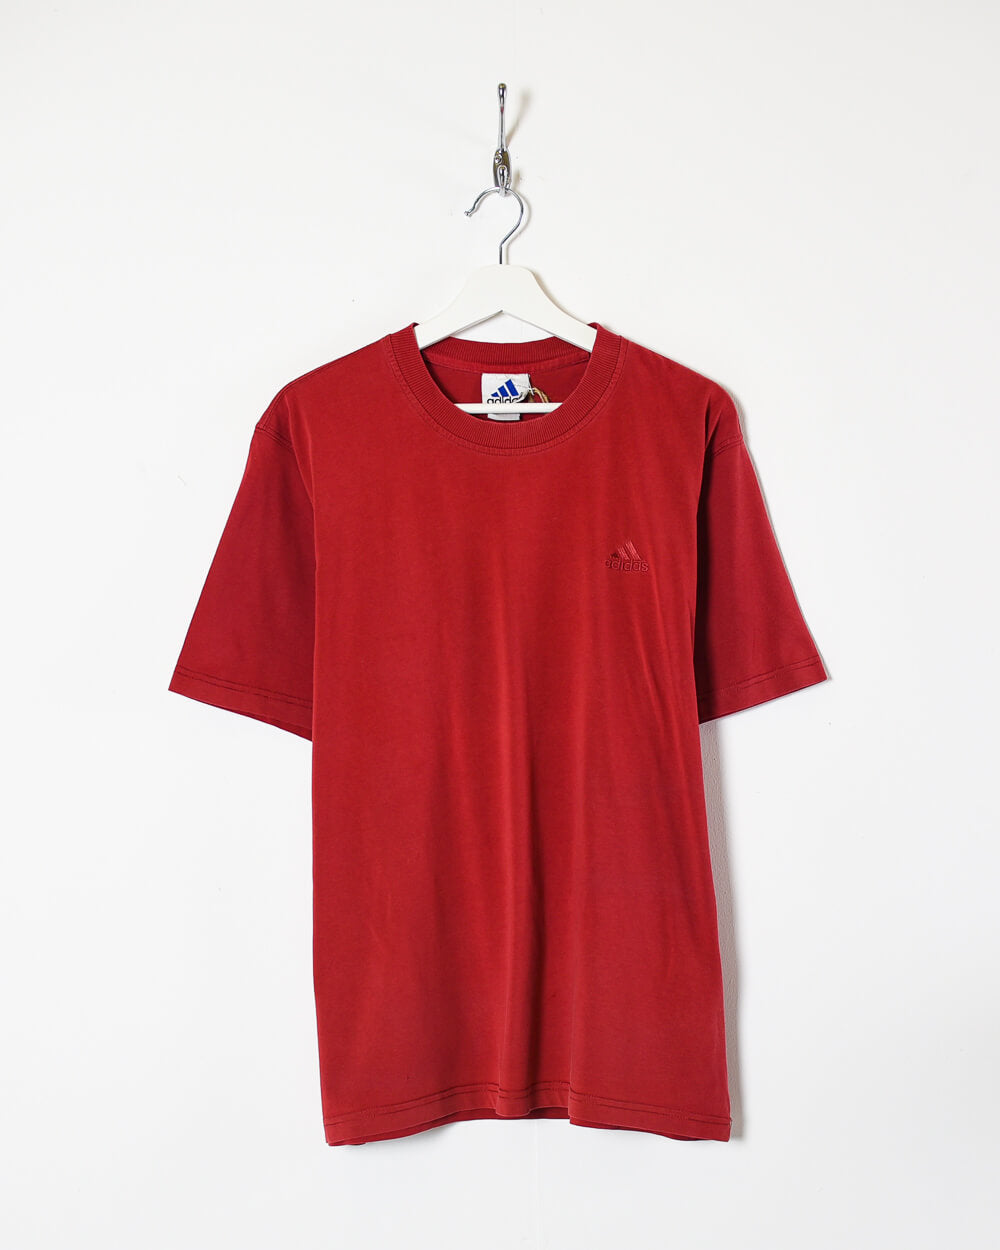 T-shirt Adidas Red size M International in Polyester - 25969002